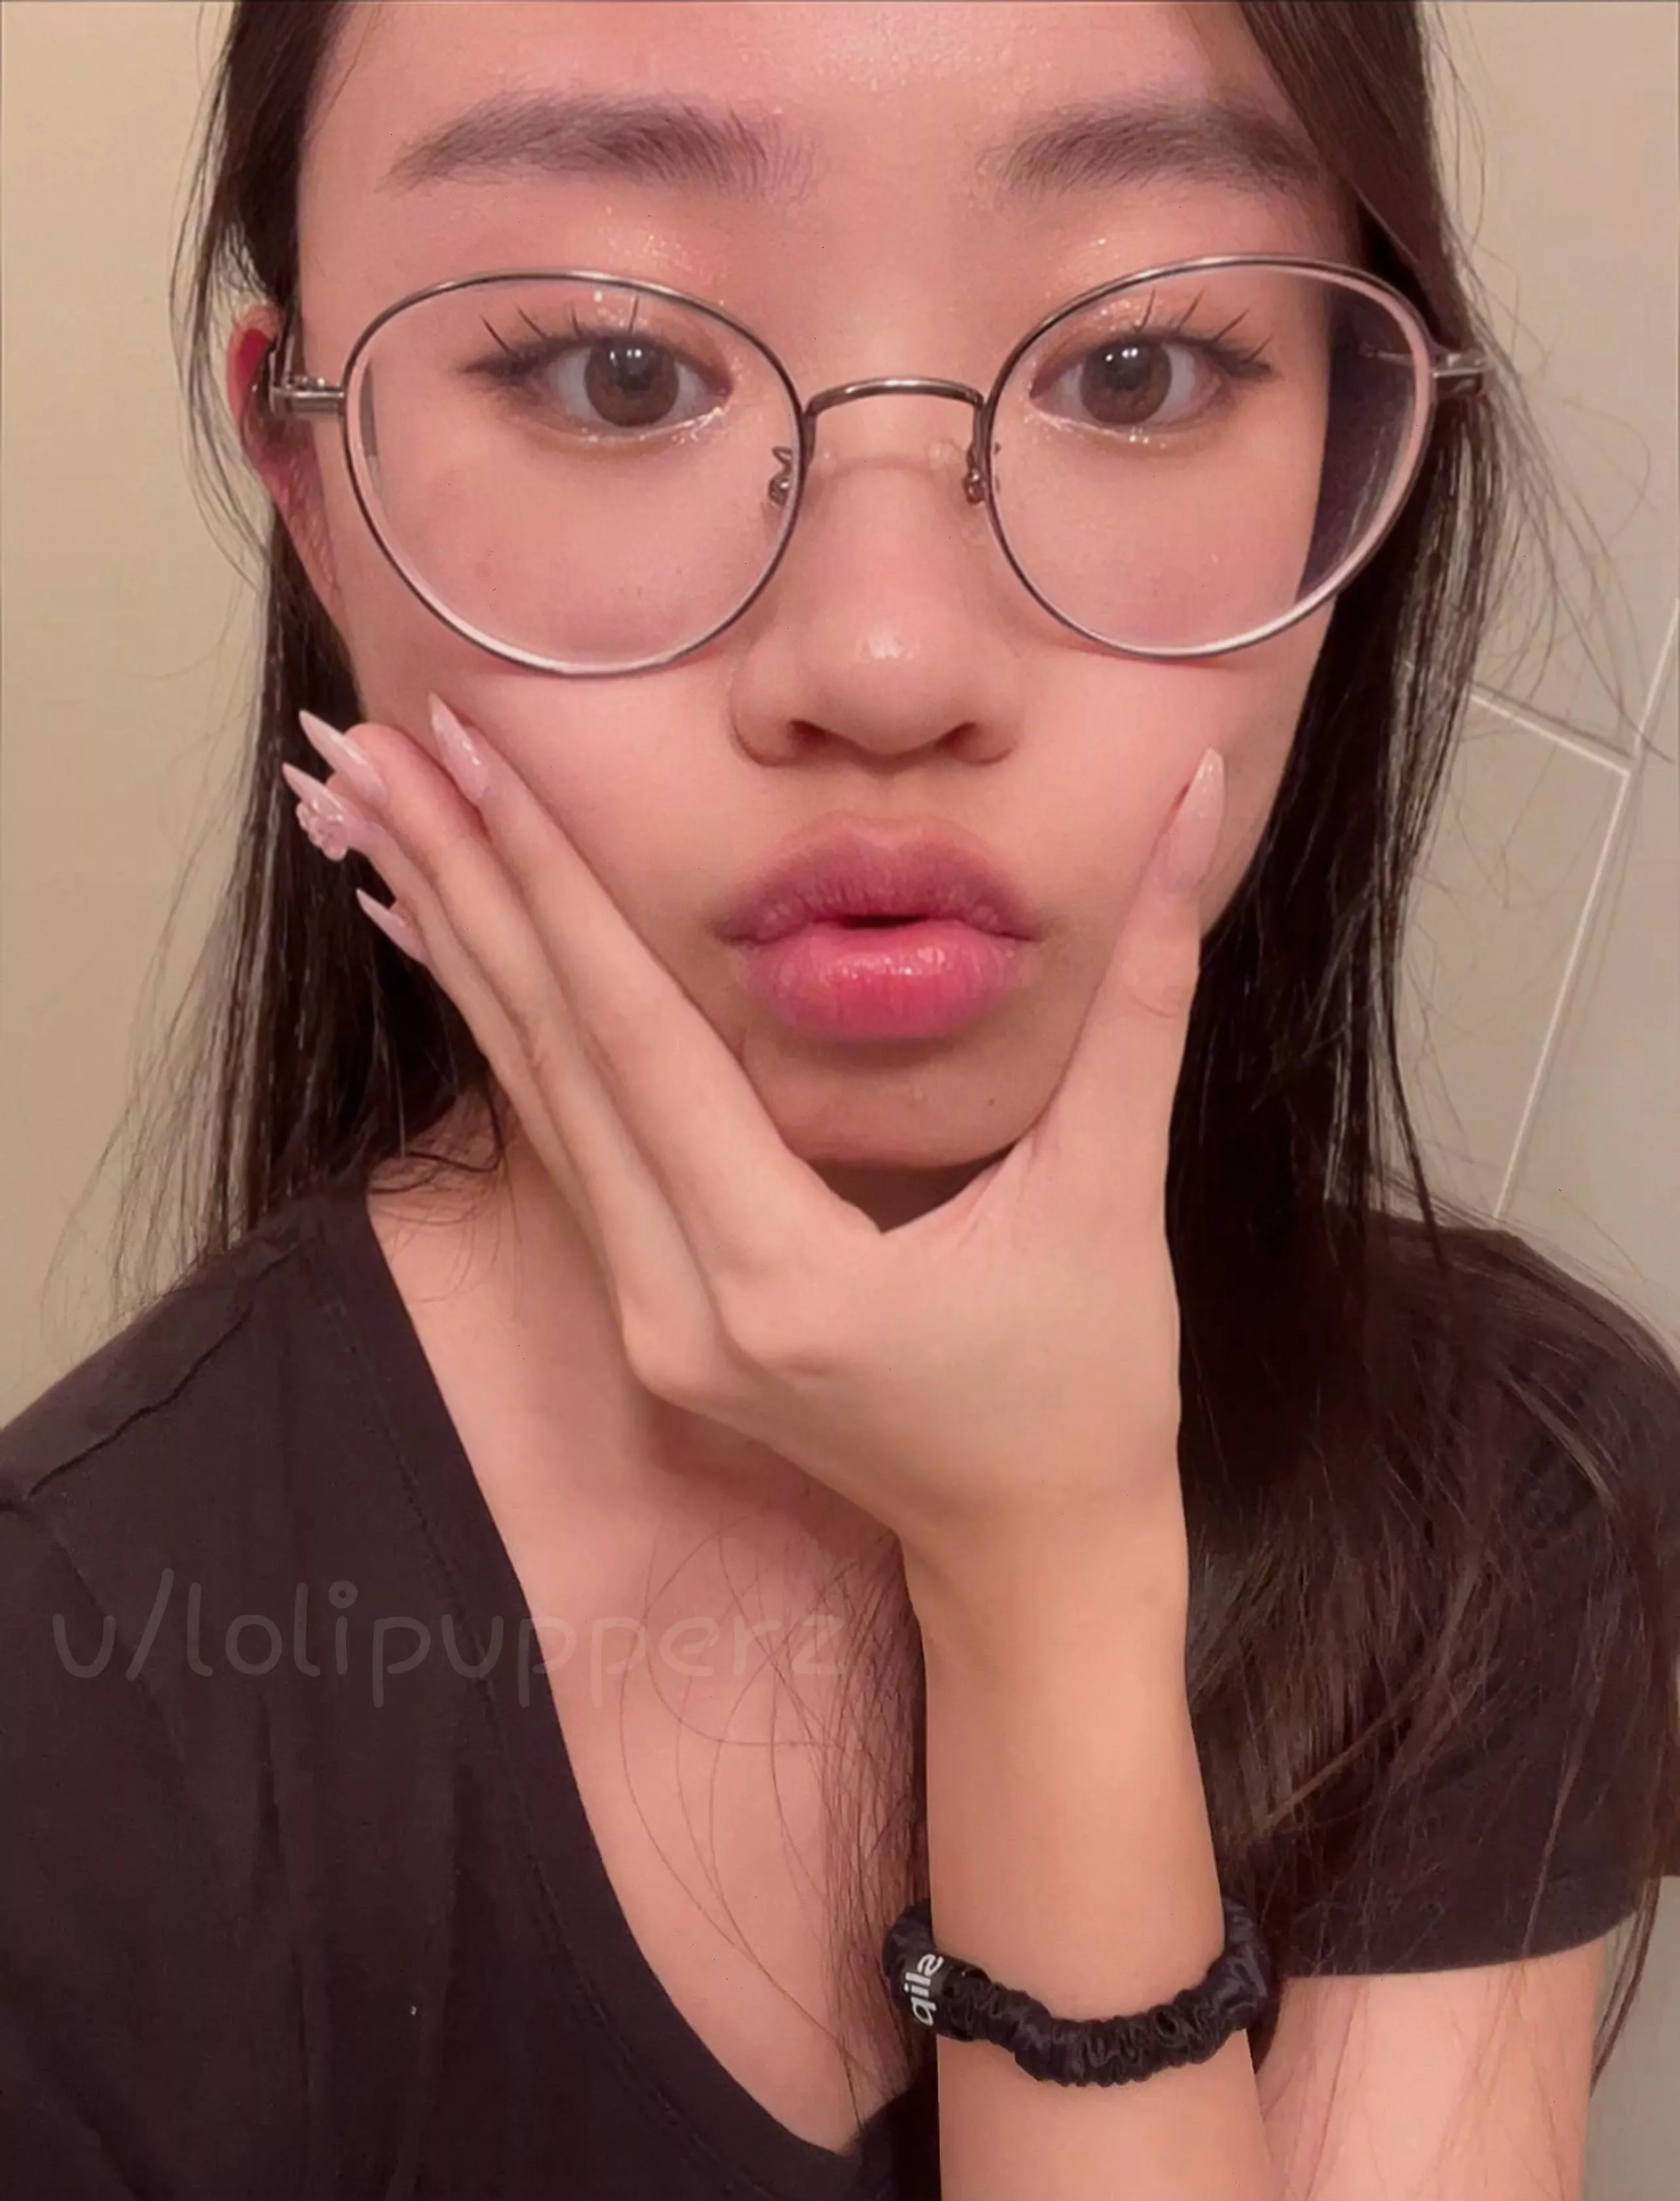 2568px x 3364px - pretty lips for making out and sucking your cock ðŸ¥ºðŸ’— nudes by lolipupperz